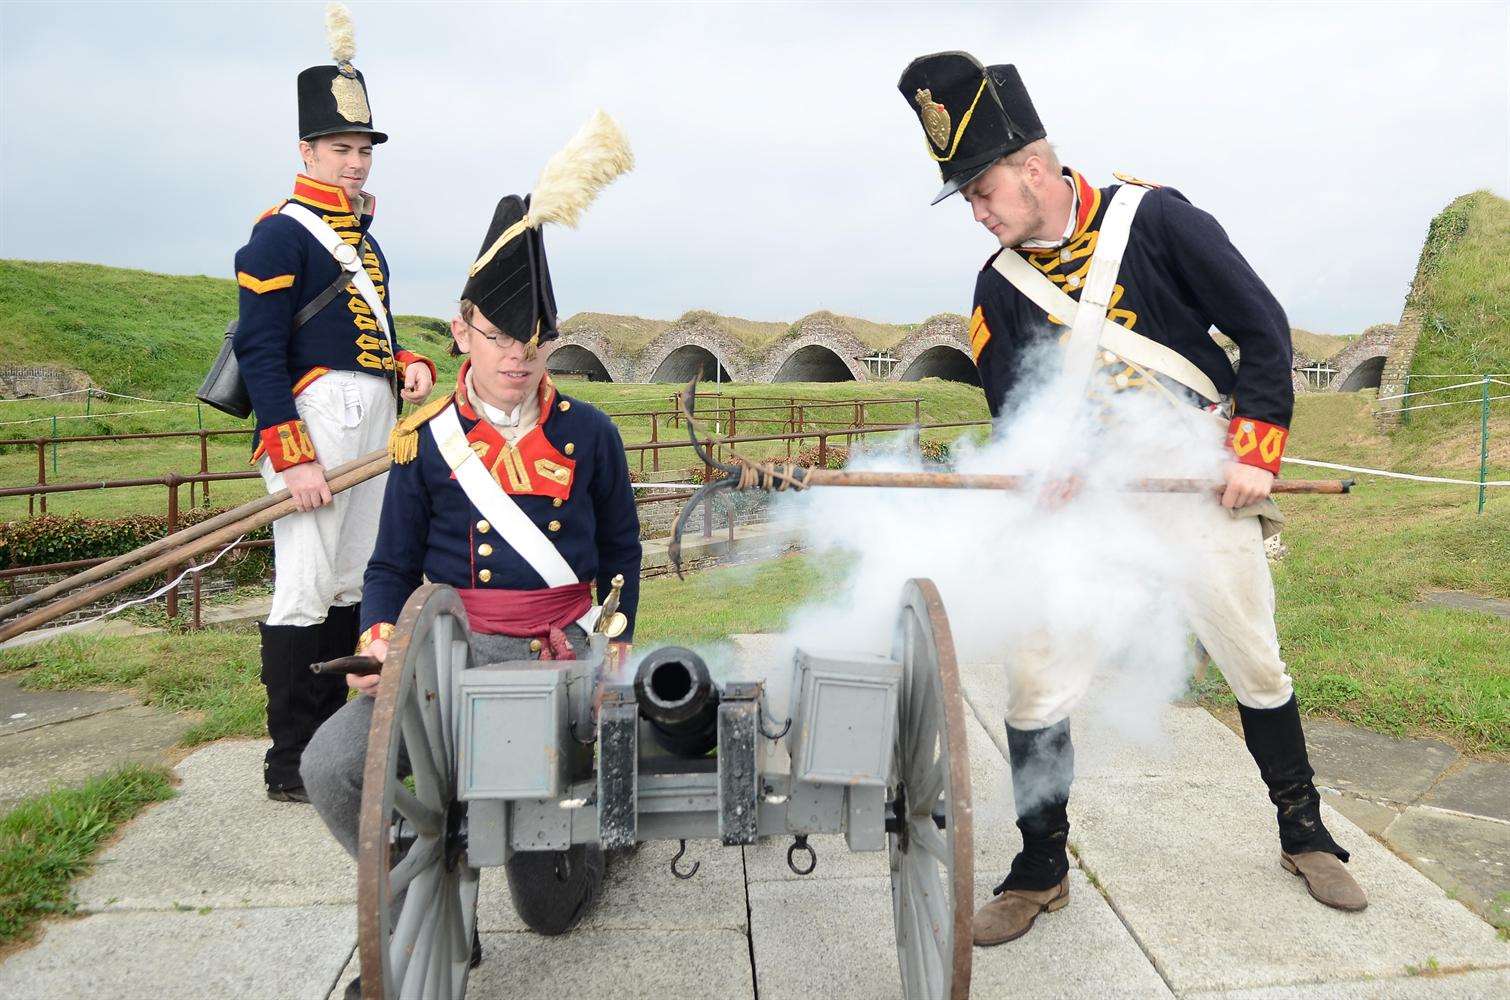 Richard Hiatt, Philip Jopson and Chris Bassett from the 4th Battalion Royal Foot artilery fire the canon at Dover Western Heights